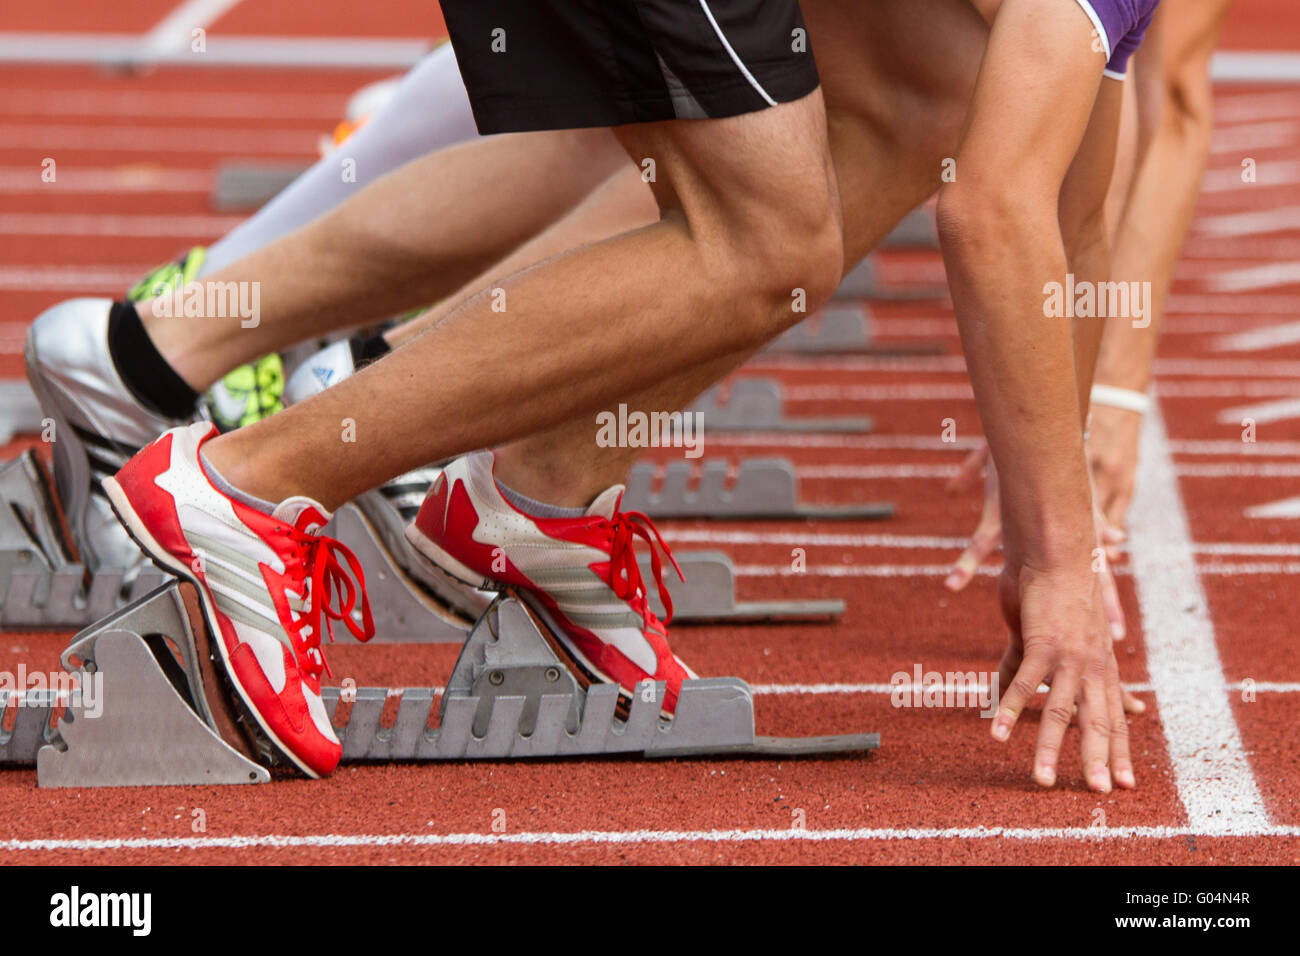 Sprint start in track and field Banque D'Images